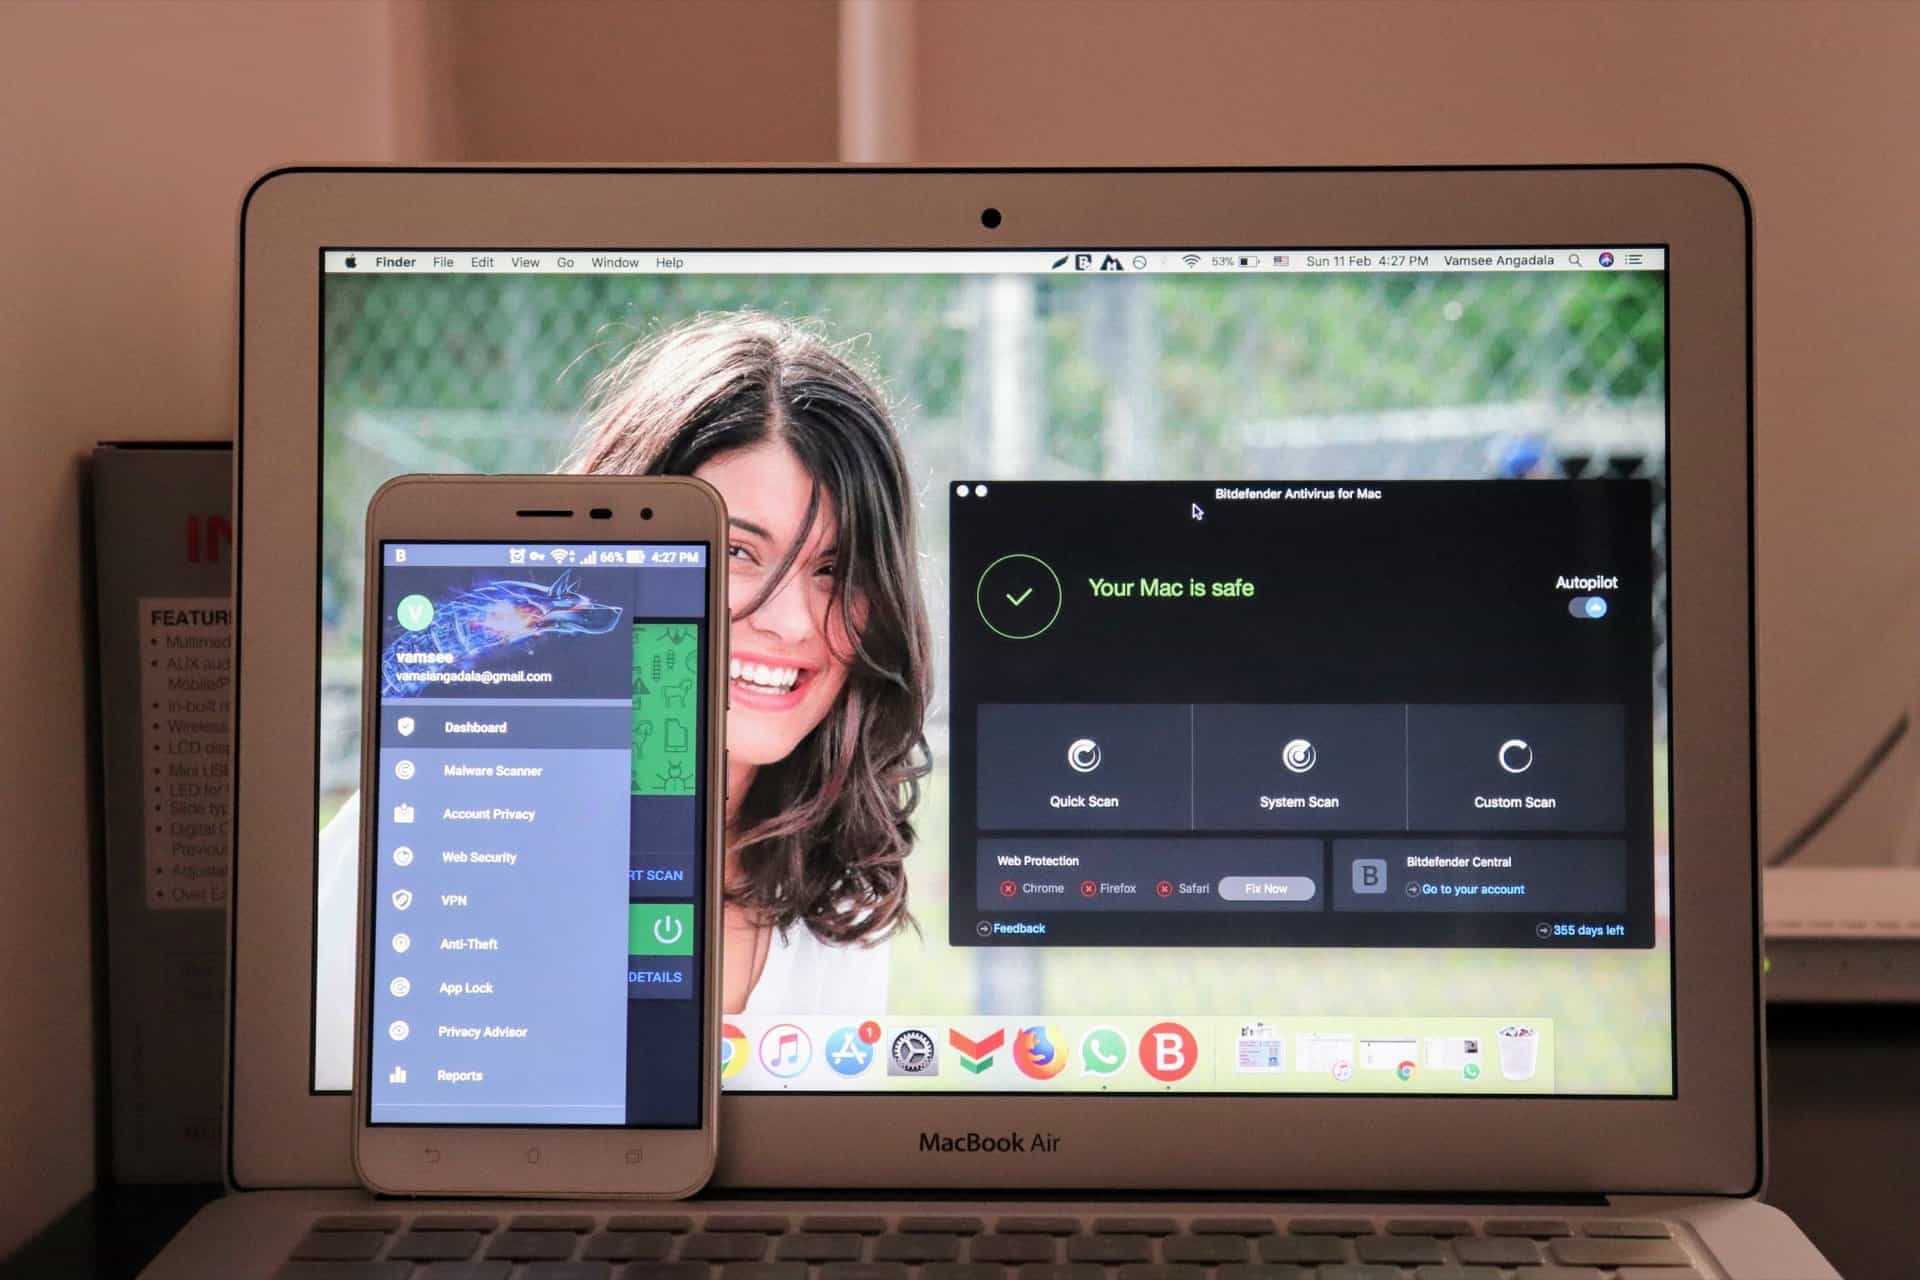 Bitdefender Family Pack 2018 Review - An All-in-One Security Solution for your devices - 5